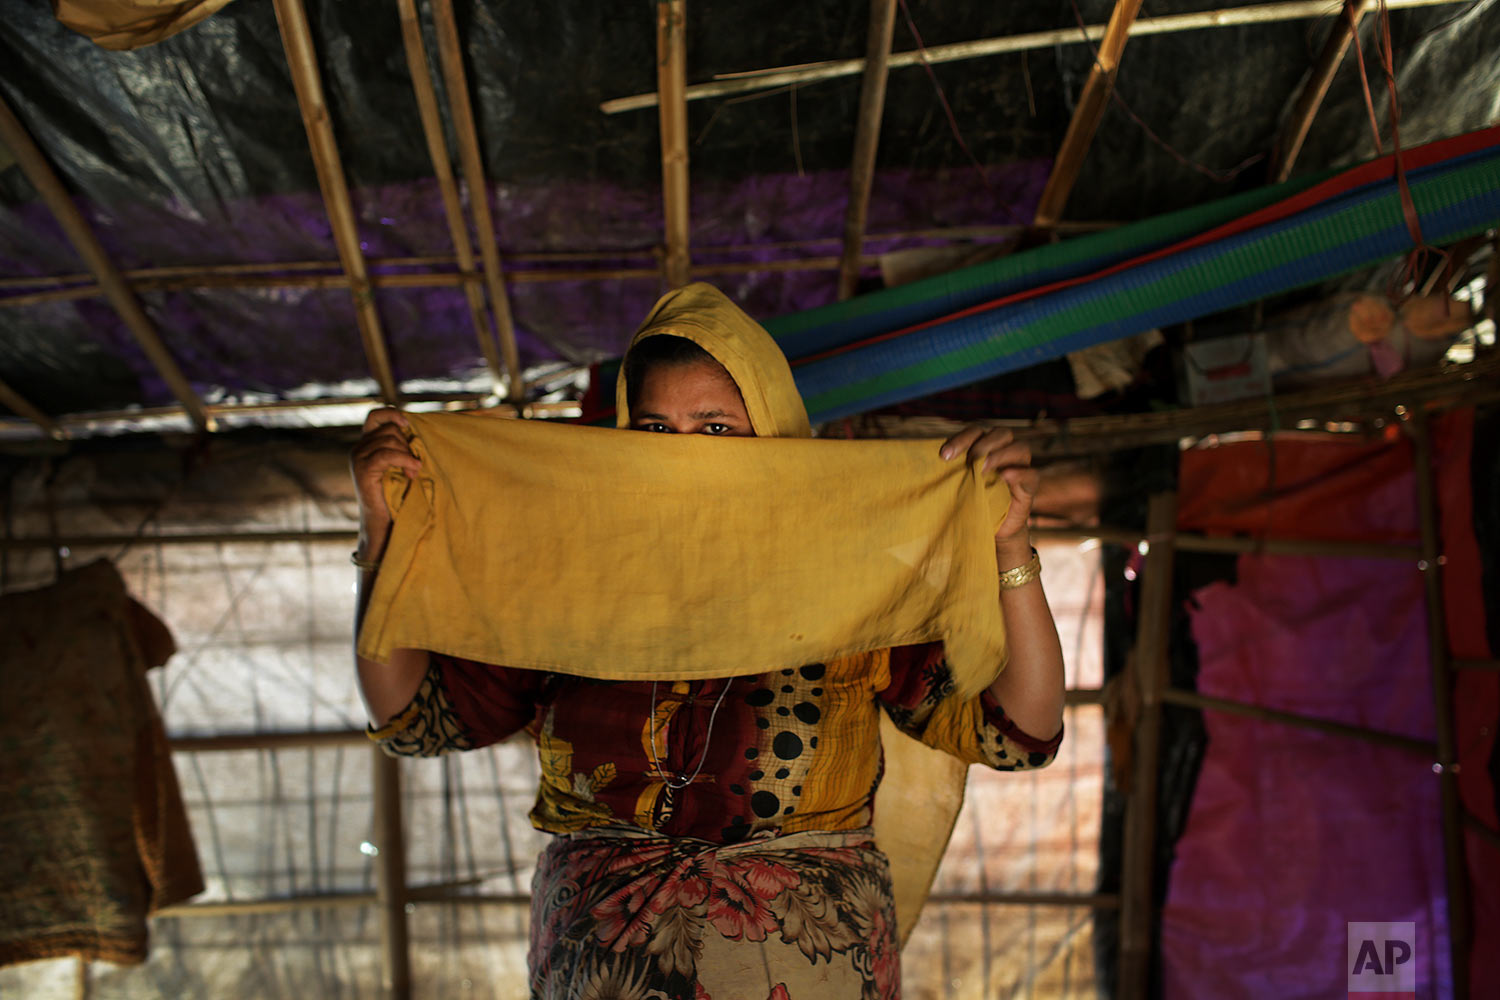  In this Tuesday, Nov. 21, 2017, photo, M, 25, mother of four, who says she was raped by members of Myanmar's armed forces in late August, is photographed in her tent in Kutupalong refugee camp in Bangladesh.  (AP Photo/Wong Maye-E)




 